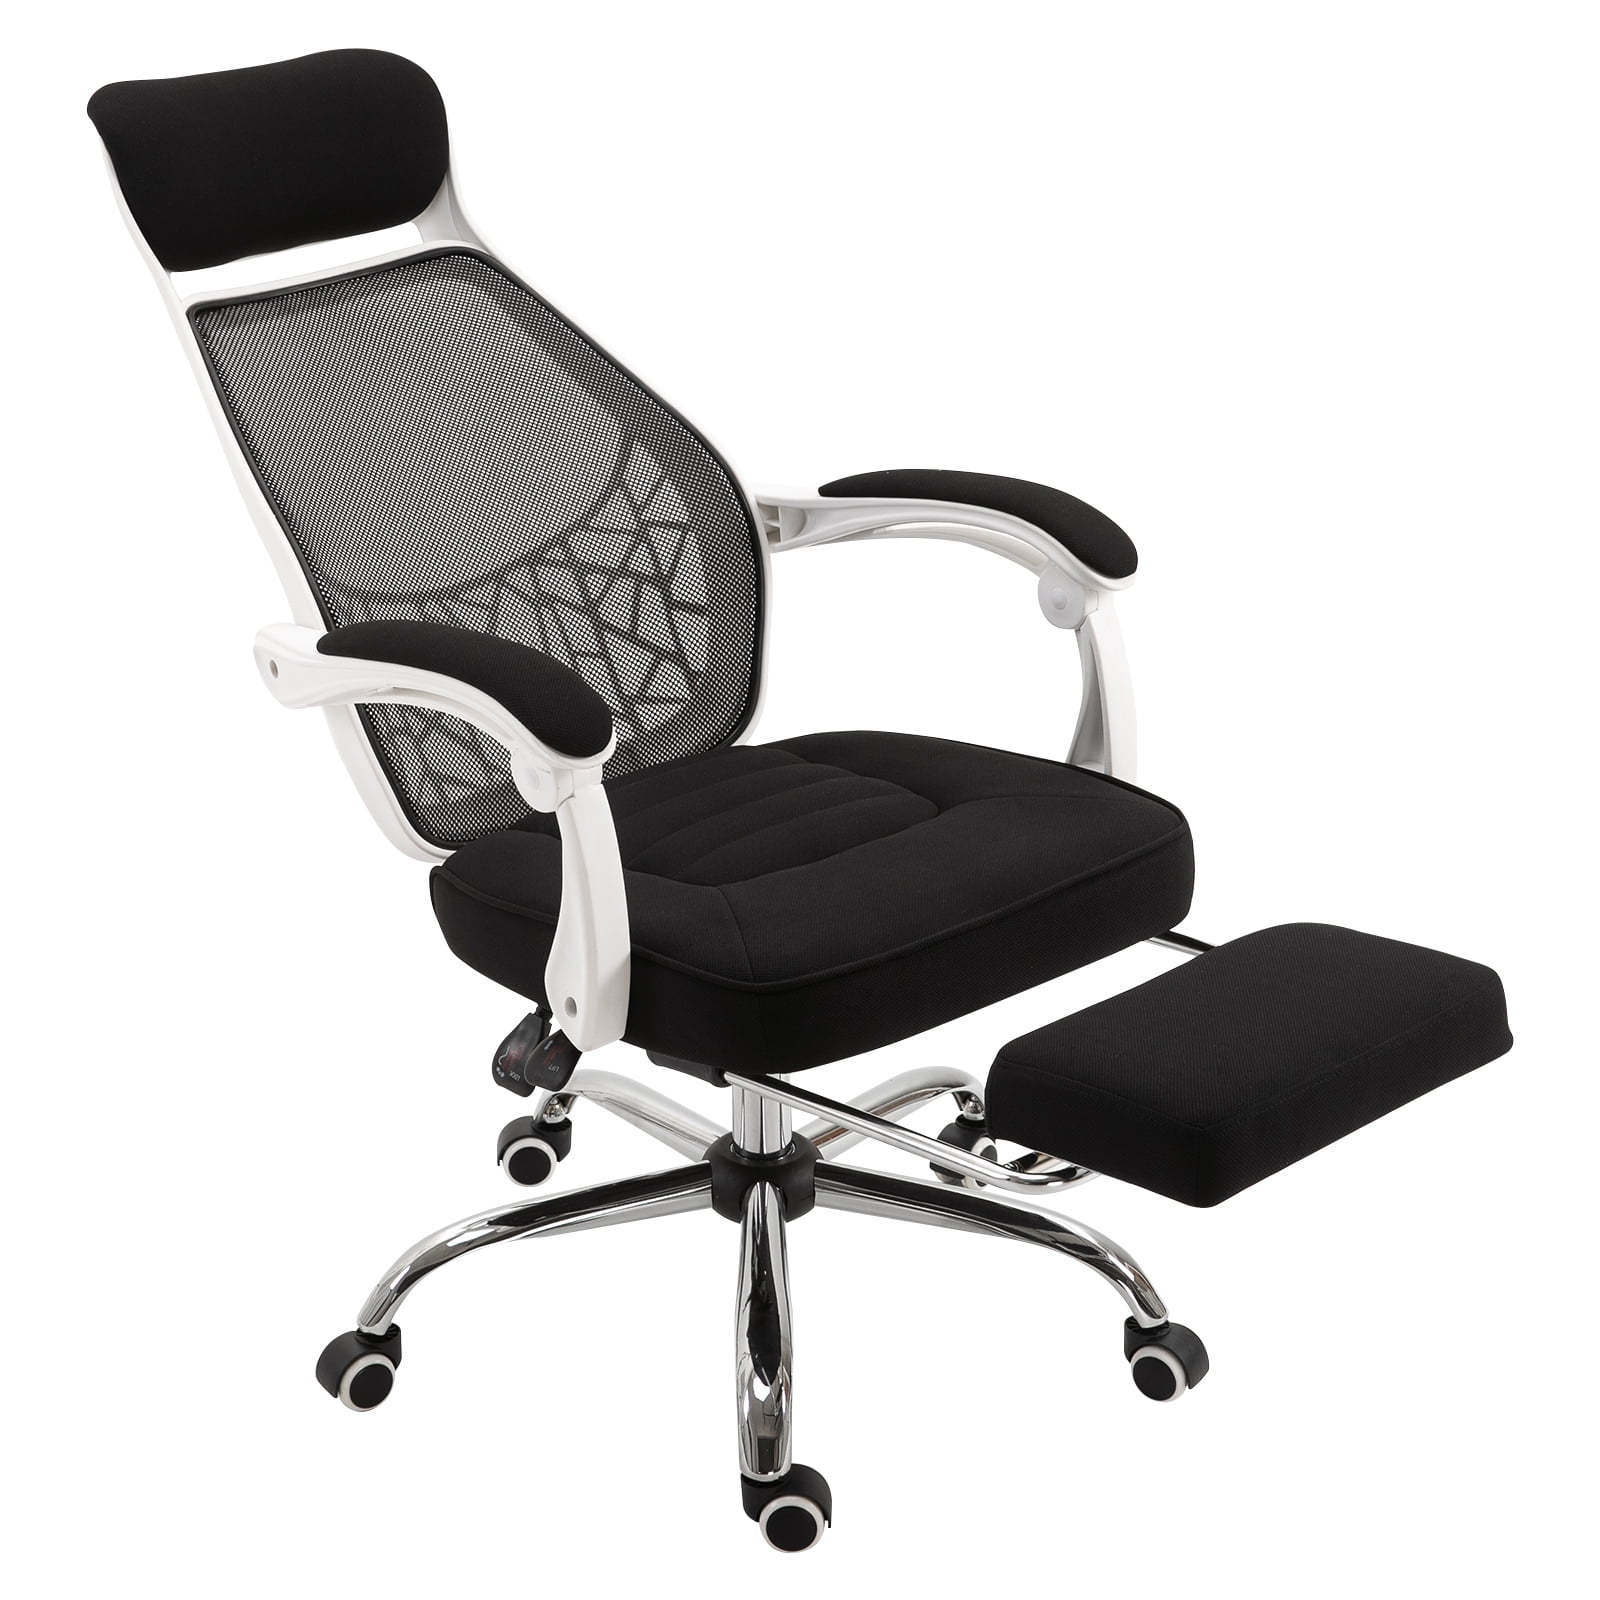 Vinsetto 360° Swivel High Back Office Chair Adjustable